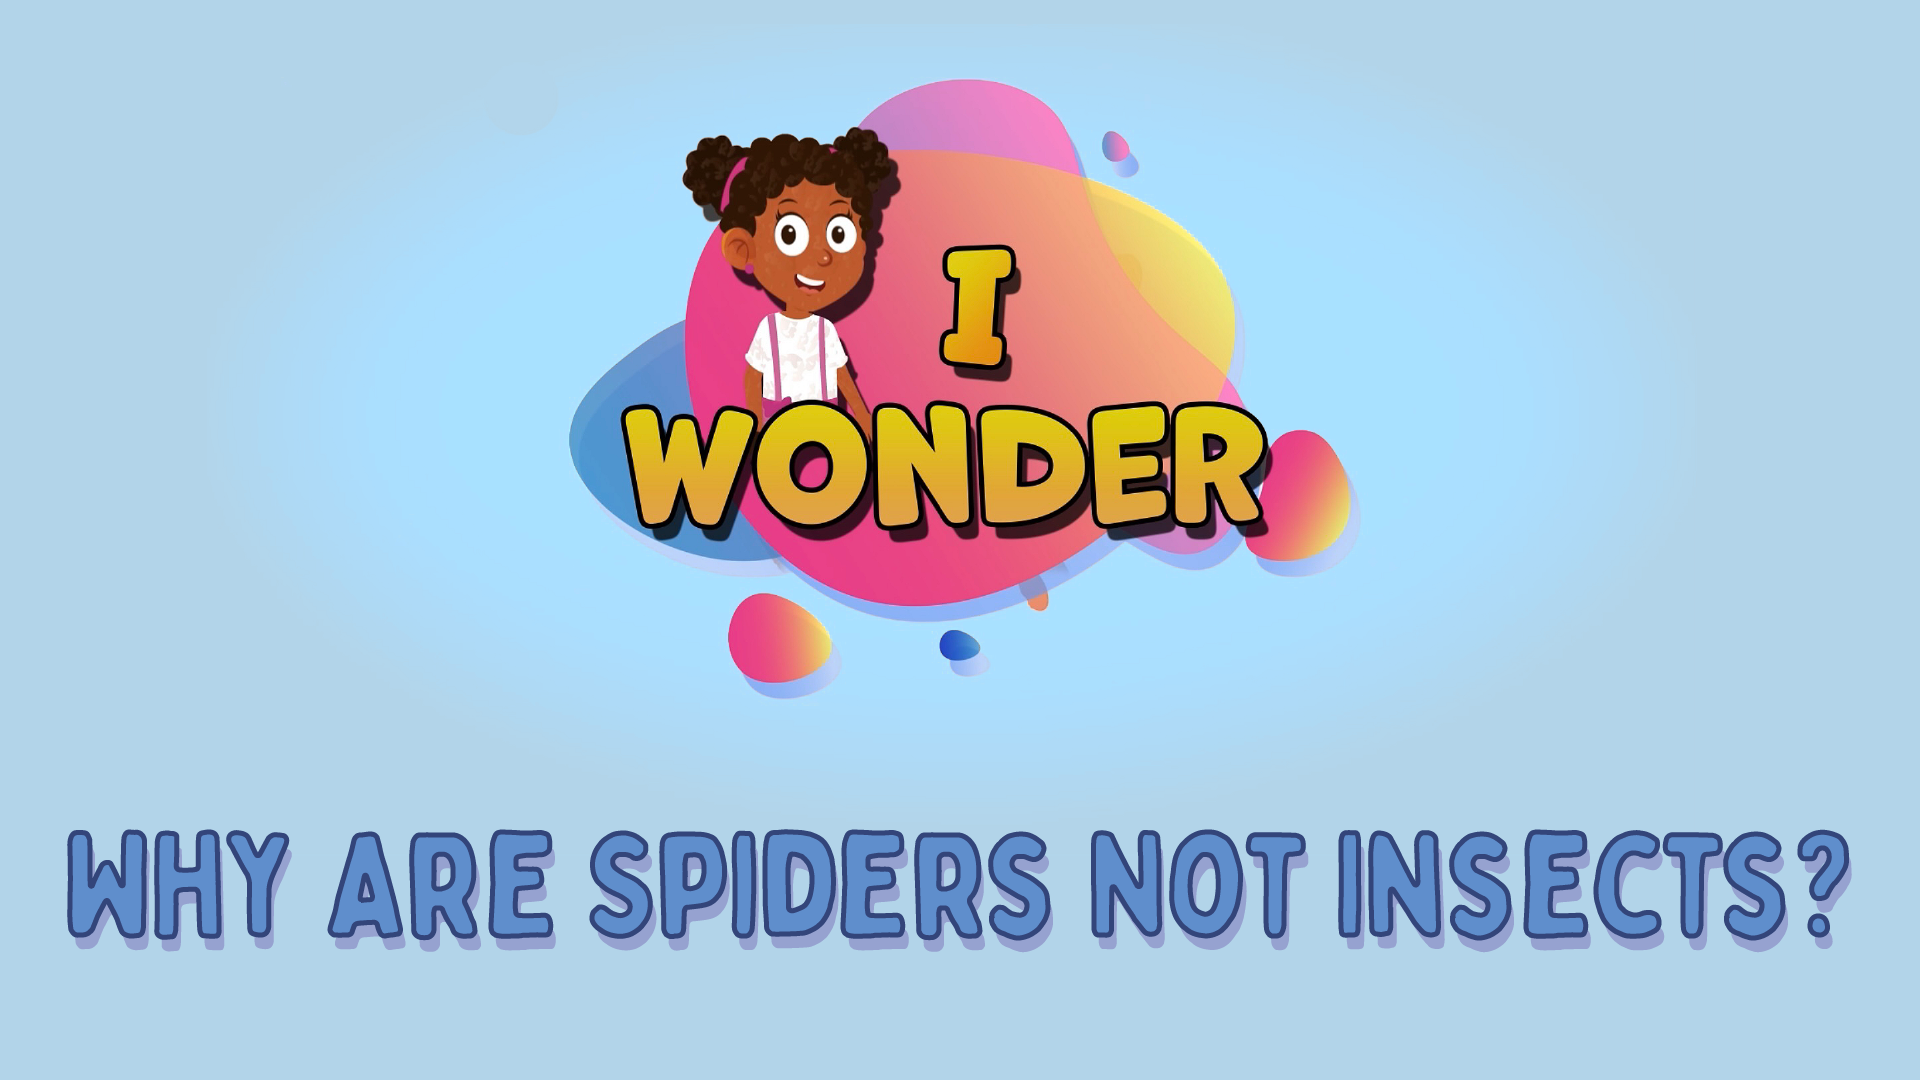 Why Are Spiders Not Insects?